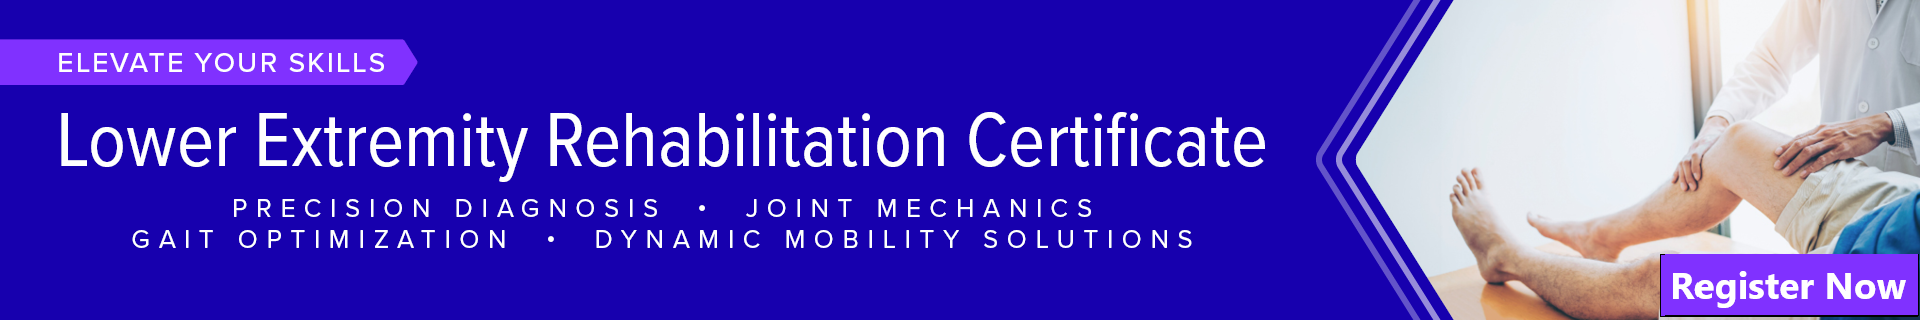 Lower Extremity Rehabilitation Certificate